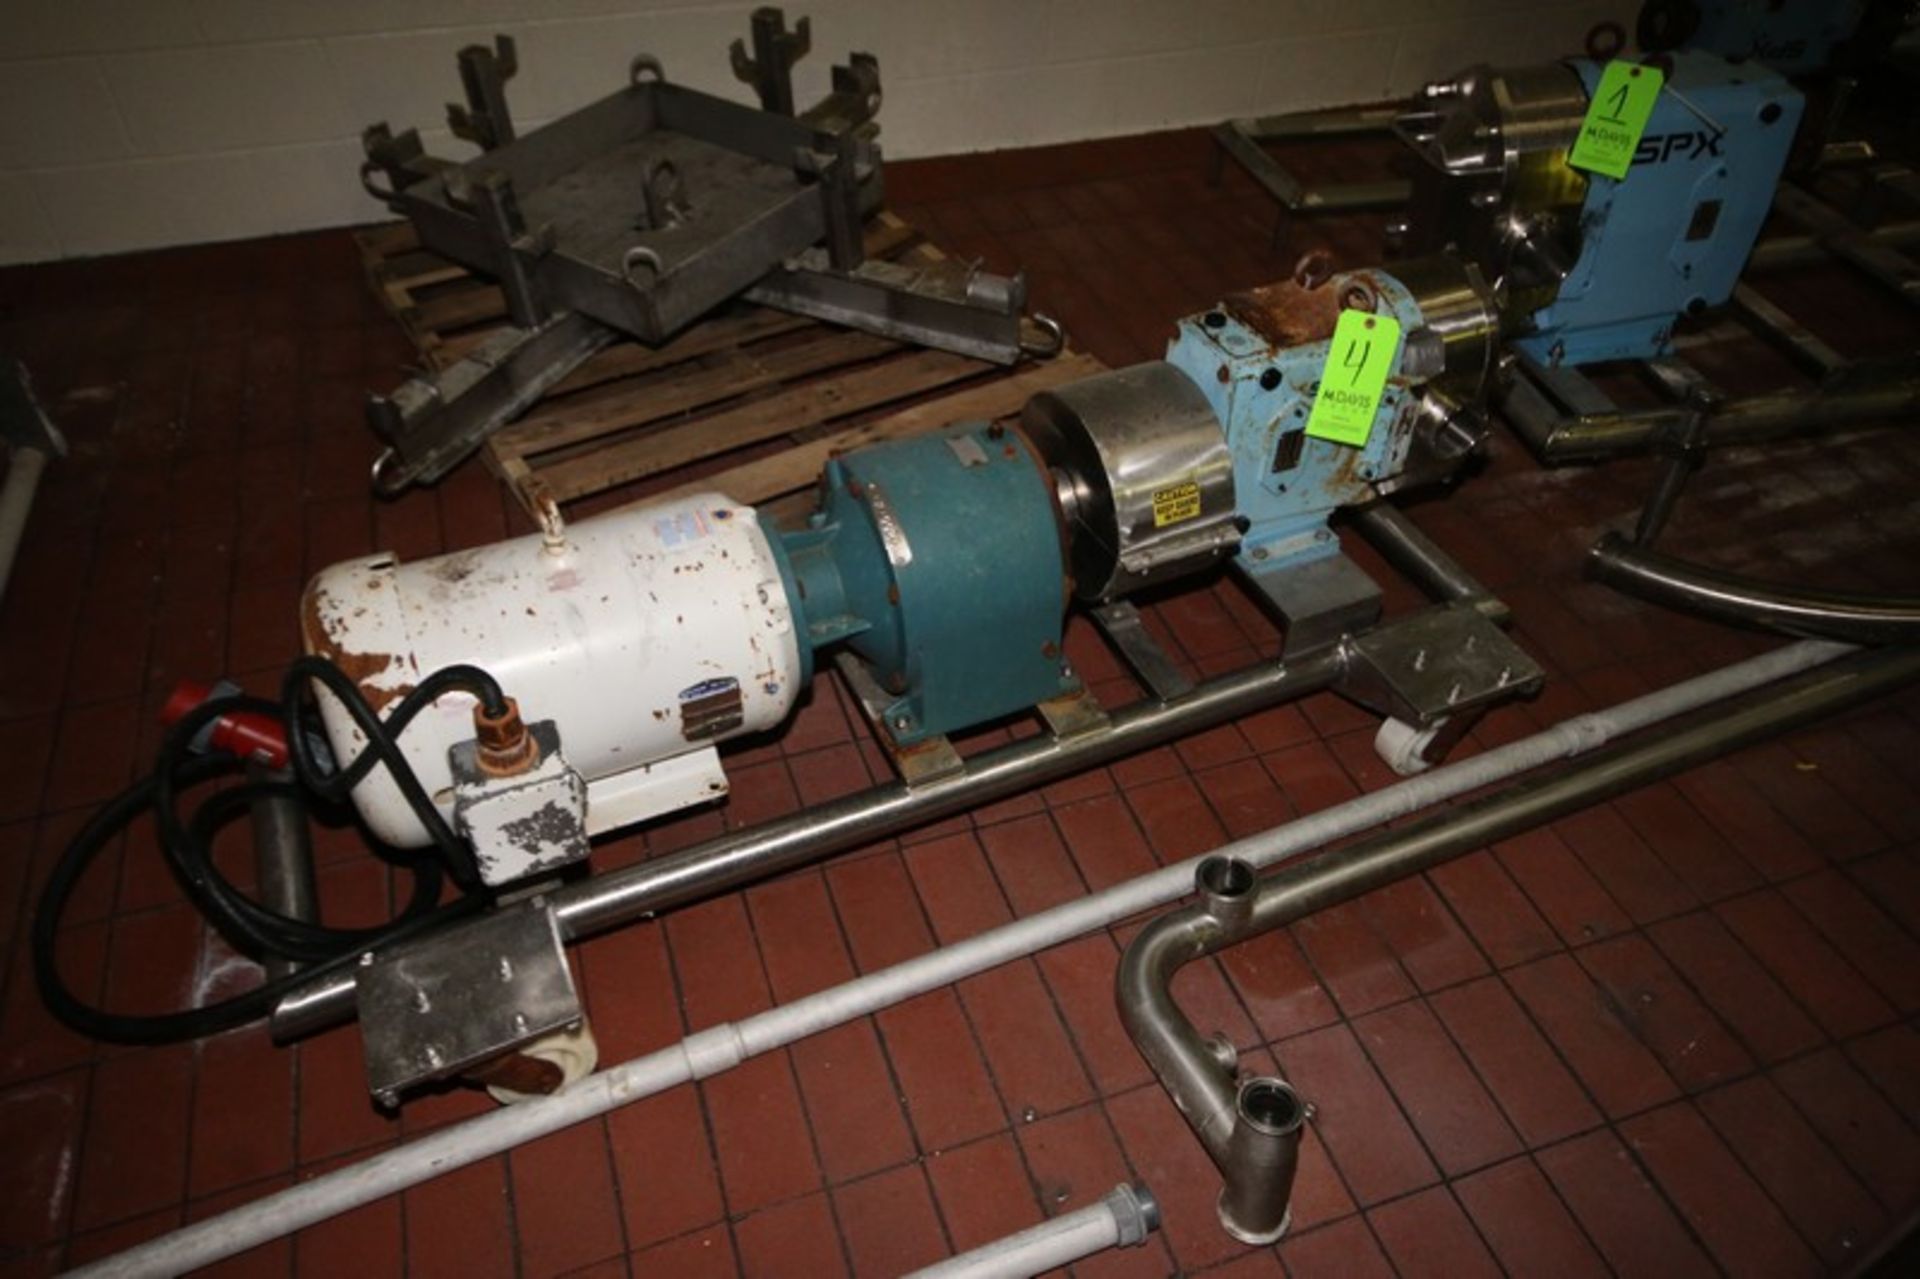 2011 SPX 20 hp Positive Displacement Pump, M/N 130 U 1, S/N 1000002616264, with Aprox. 3" Clamp Type - Image 4 of 8